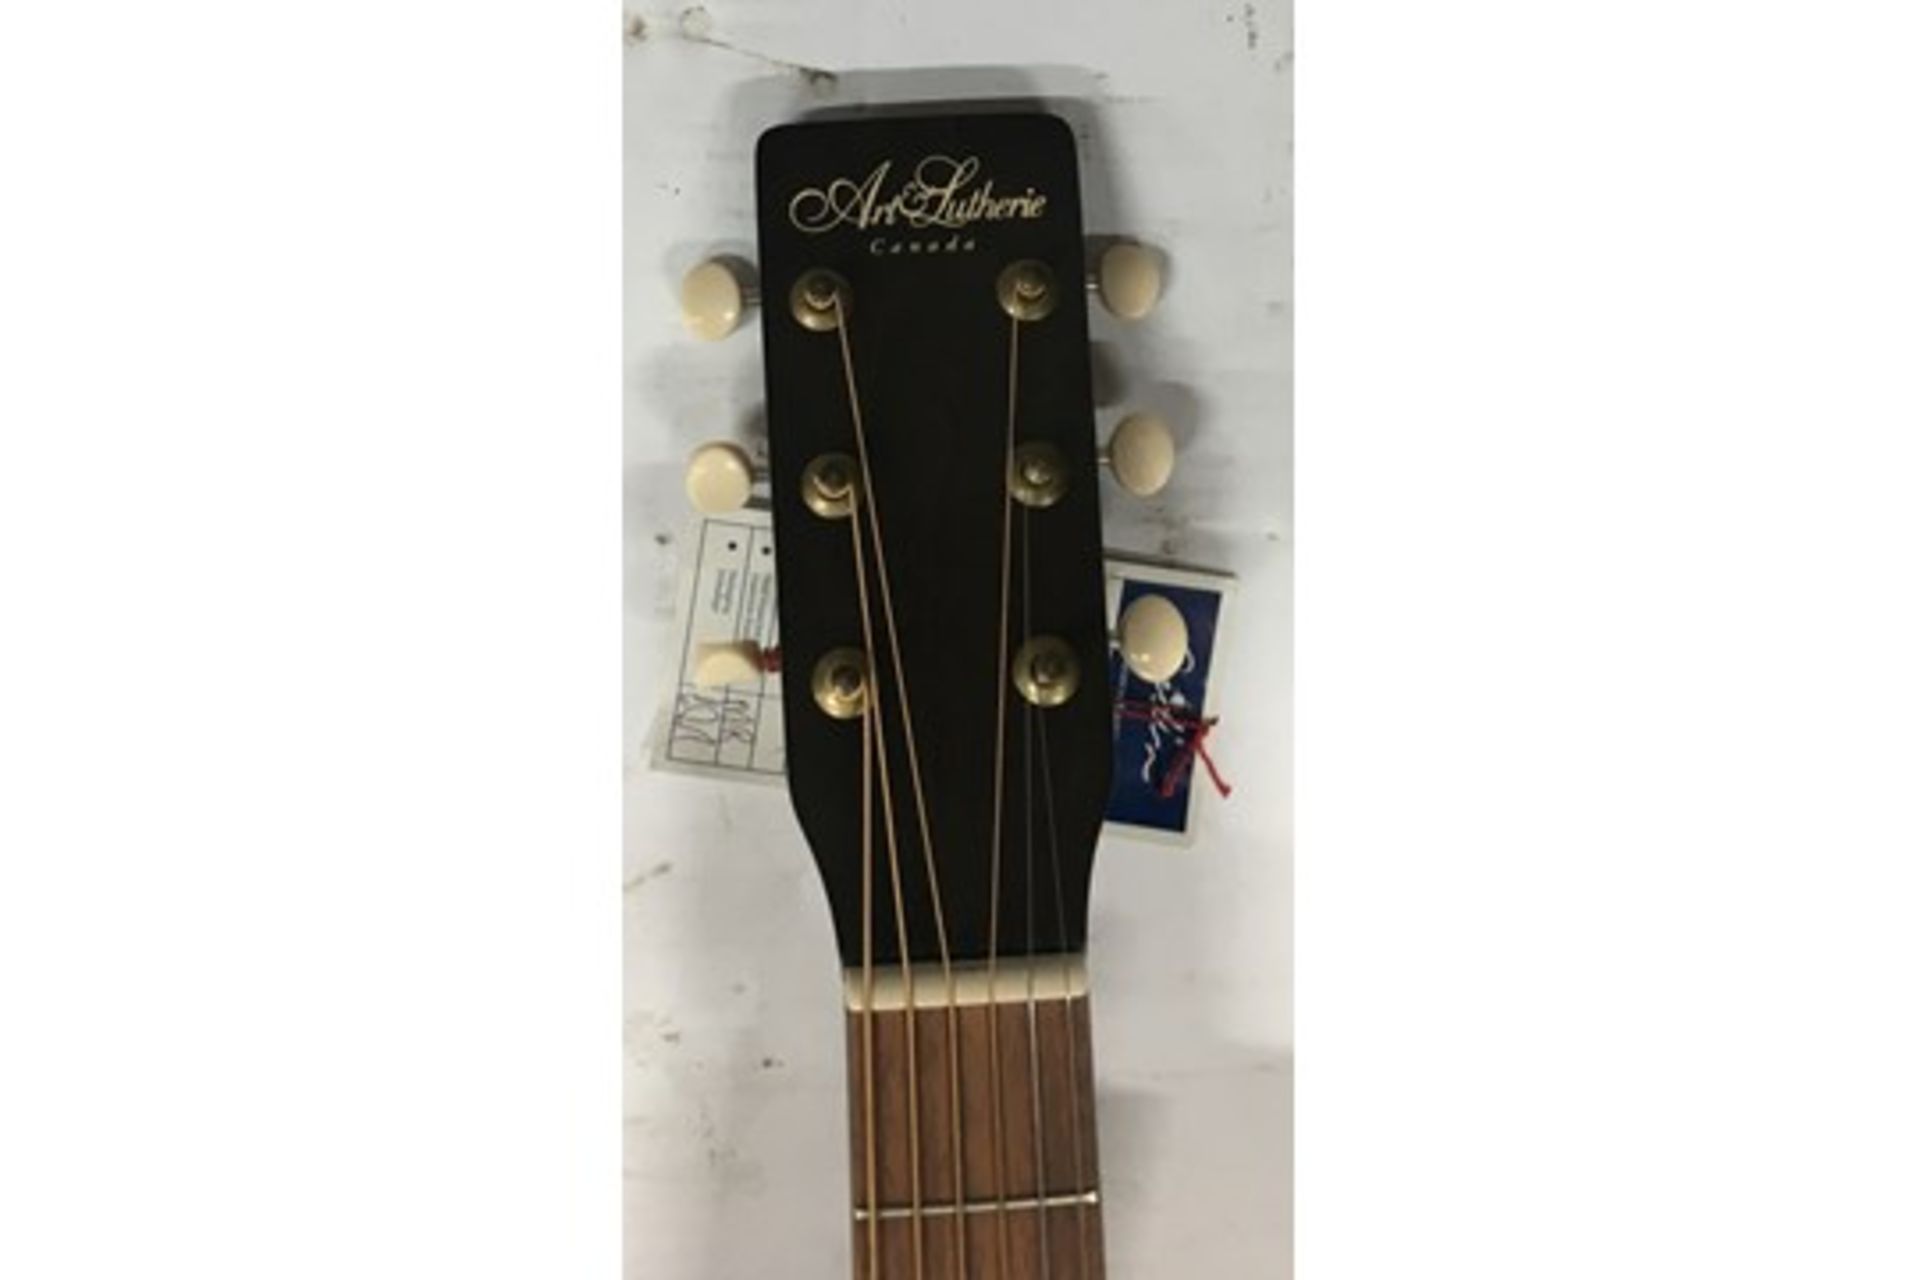 Art & Lutherie "Americana" Faded Black Acoustic Guitar - Image 3 of 3